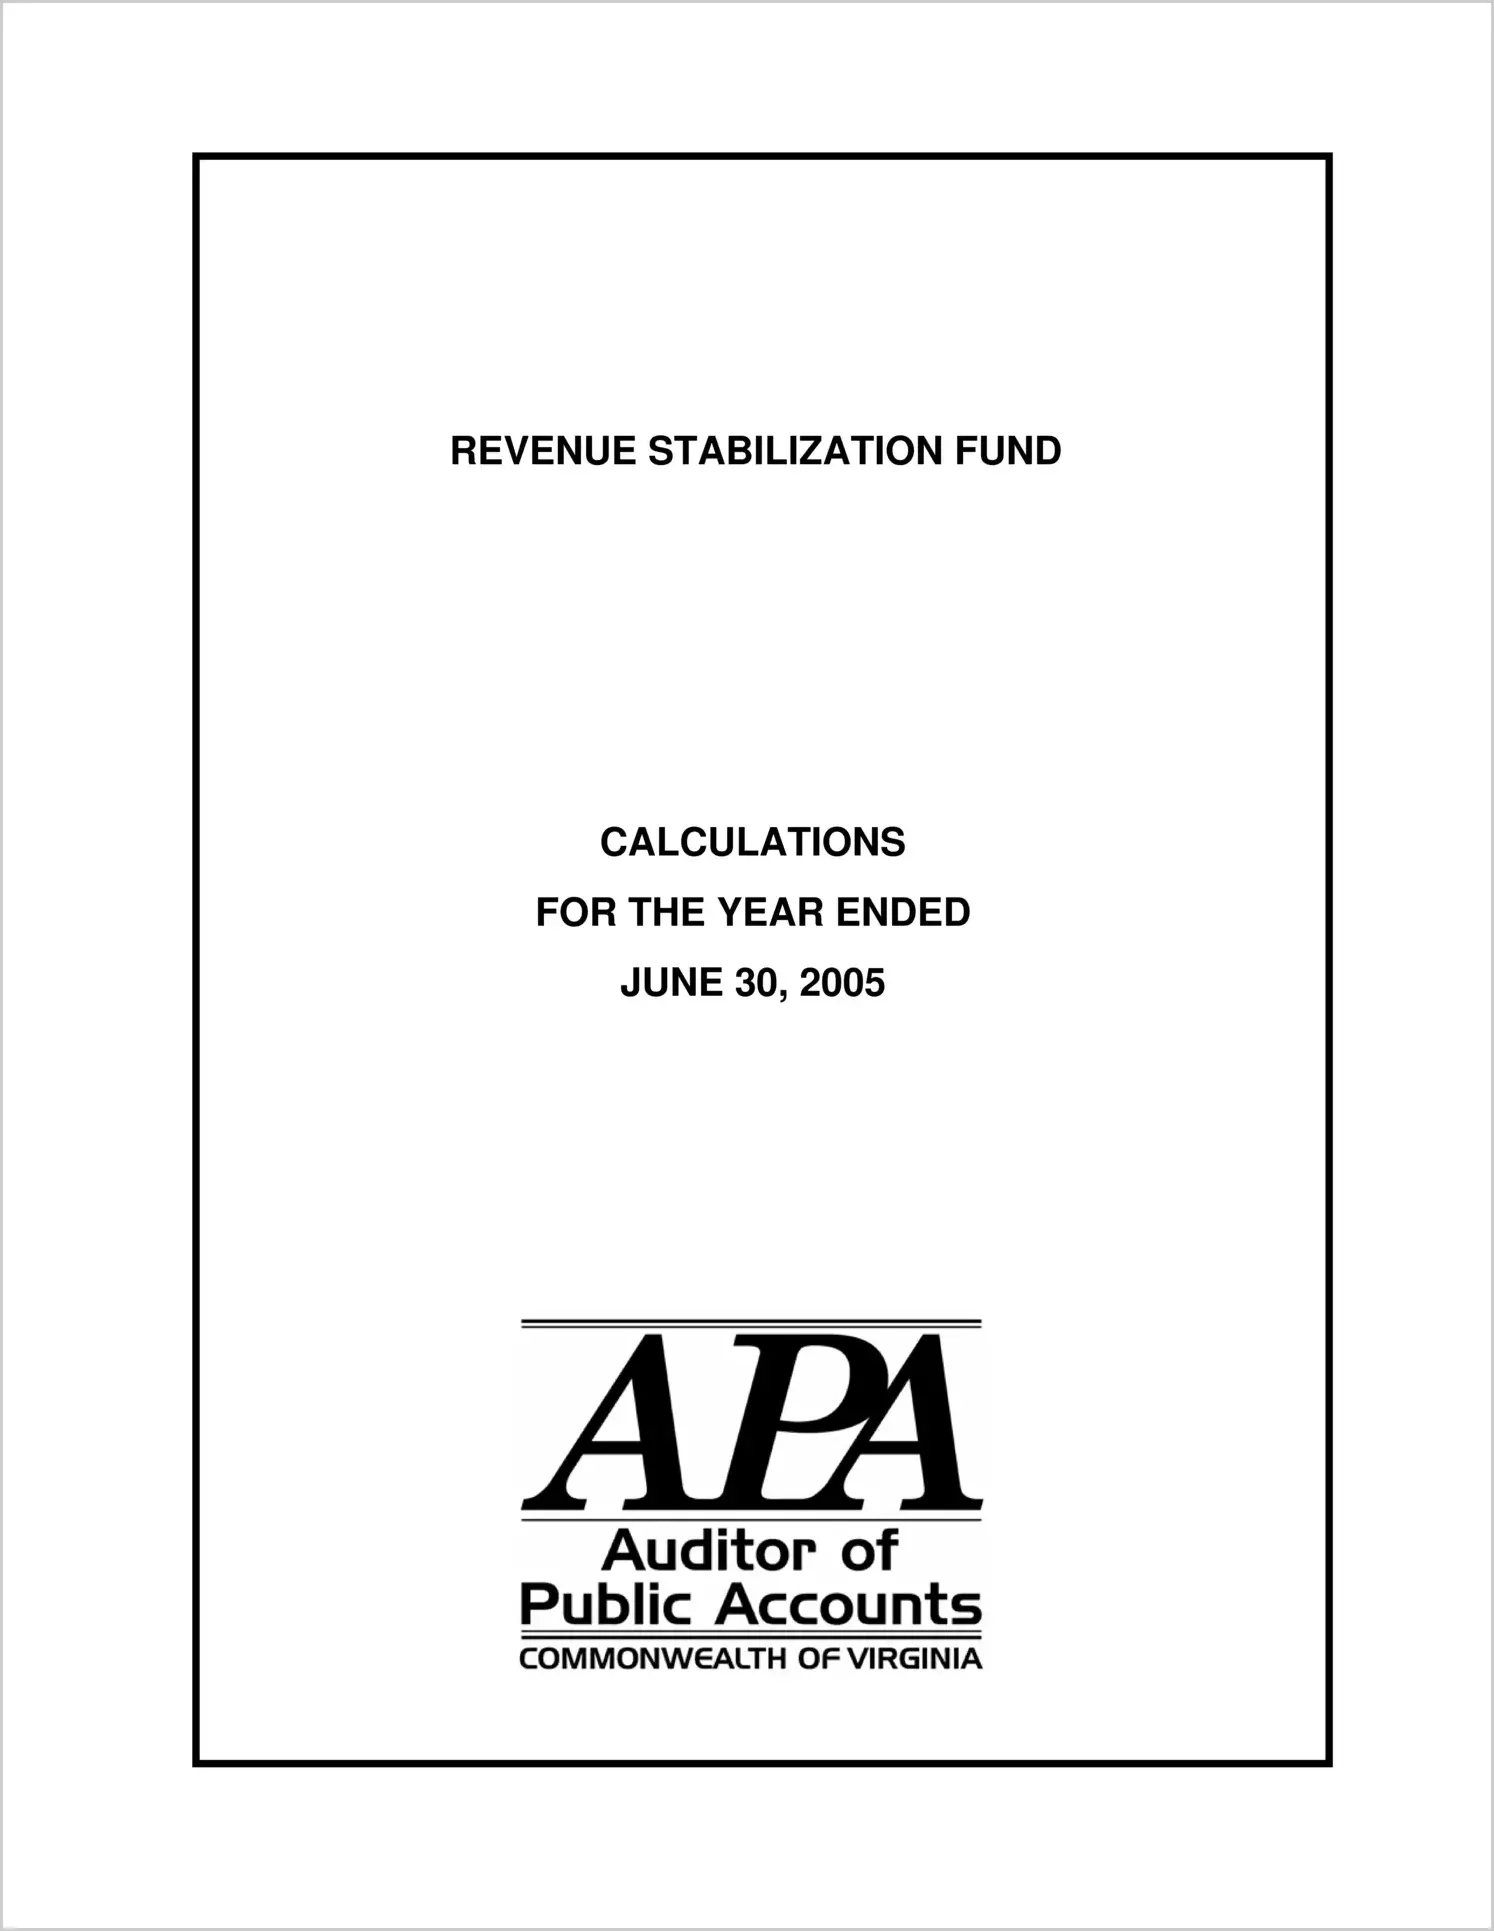 Revenue Stabilization Fund Calculations for the year ended June 30, 2005